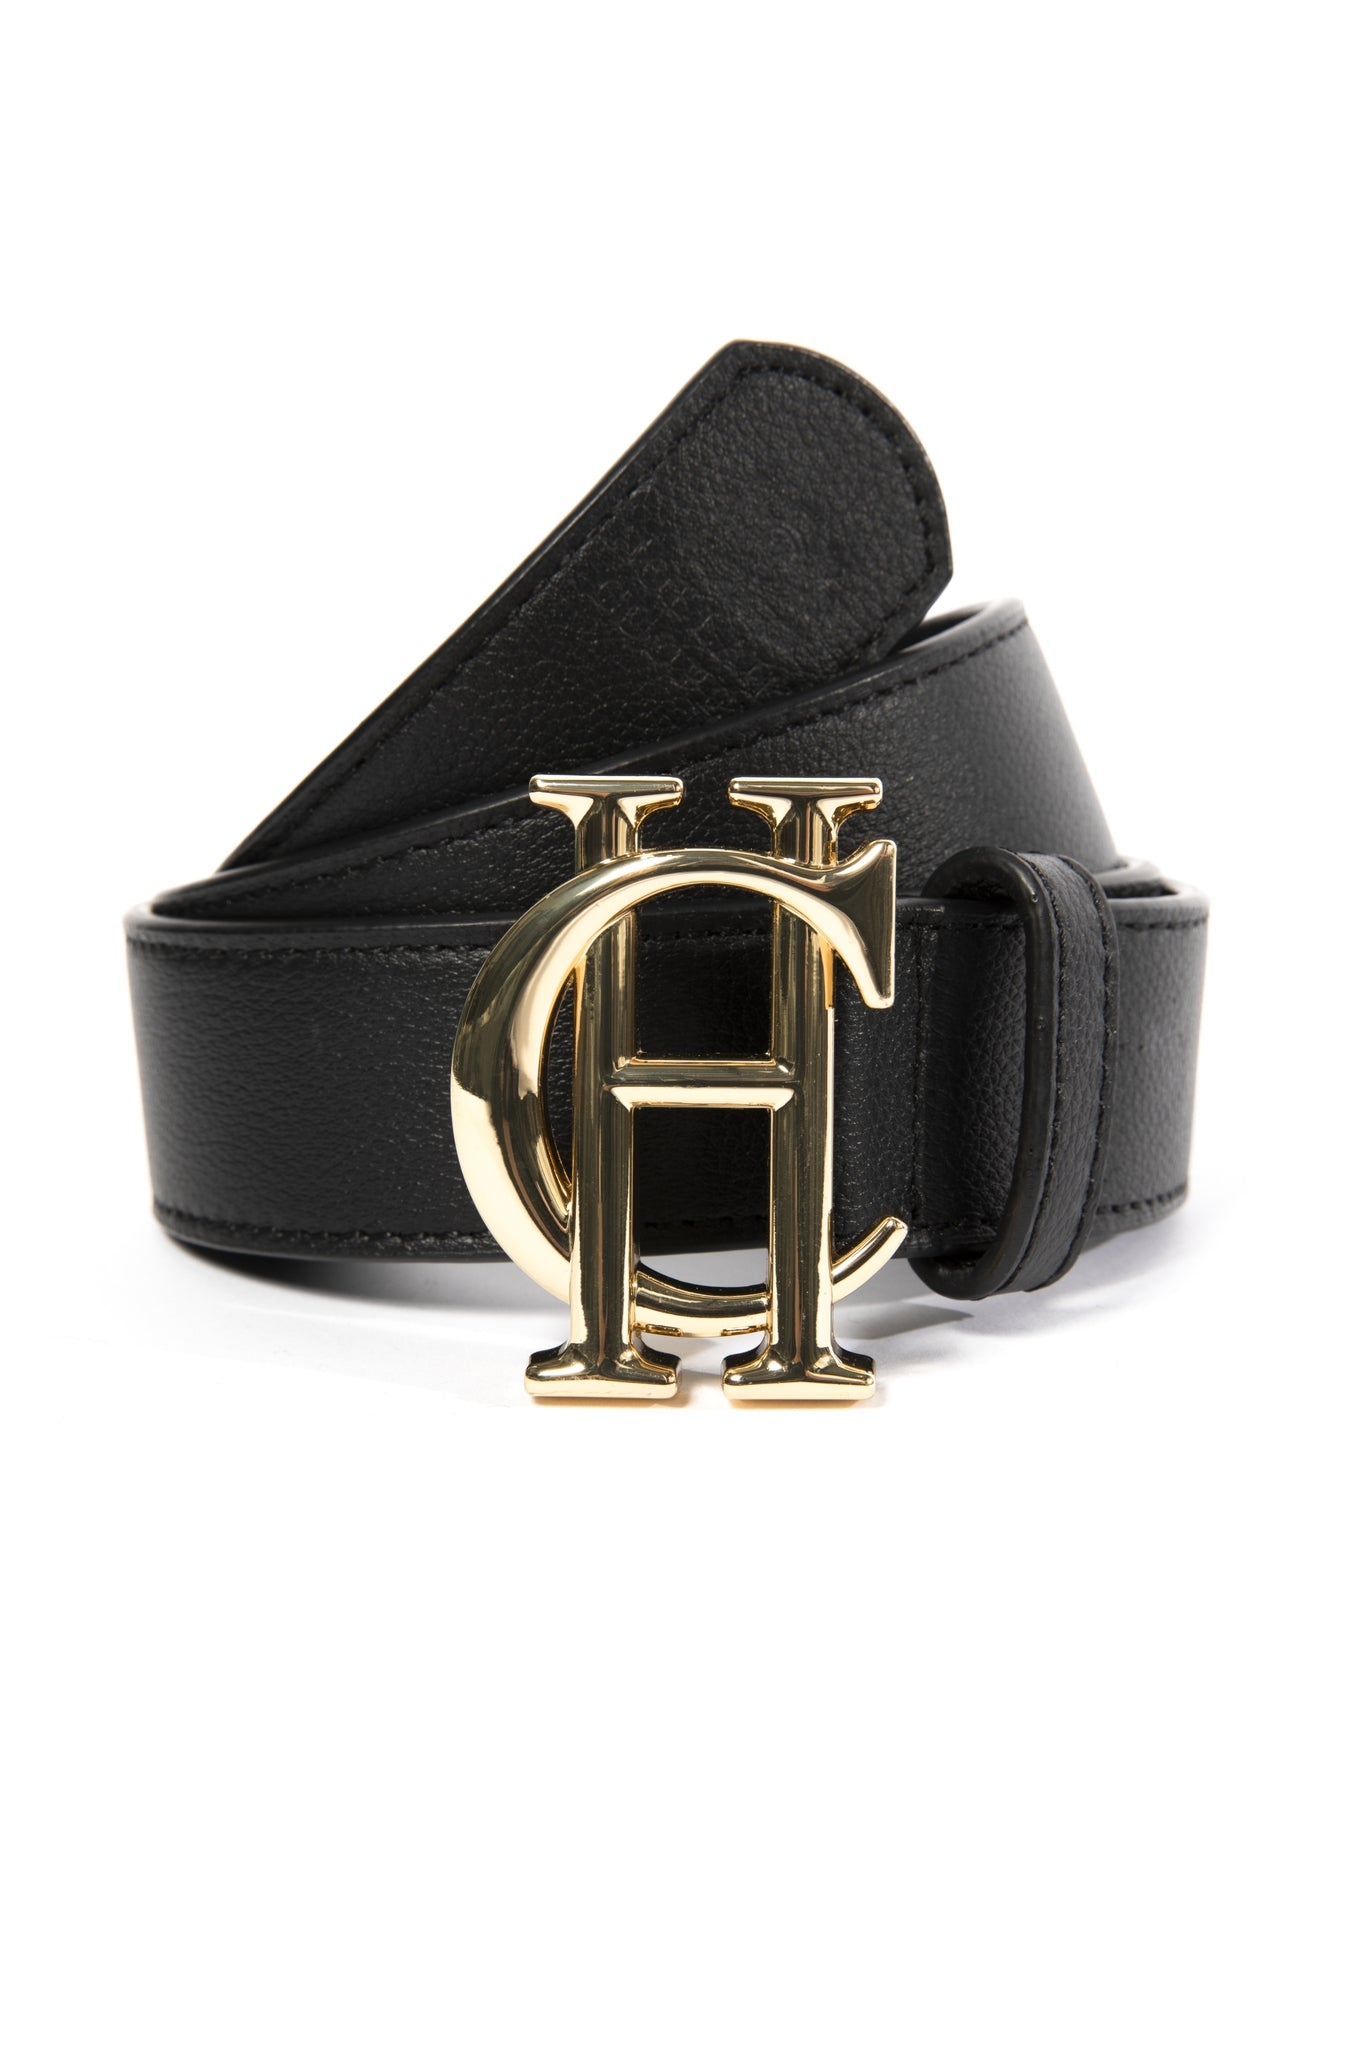 Holland Cooper Classic Ladies Belt in Black and Gold